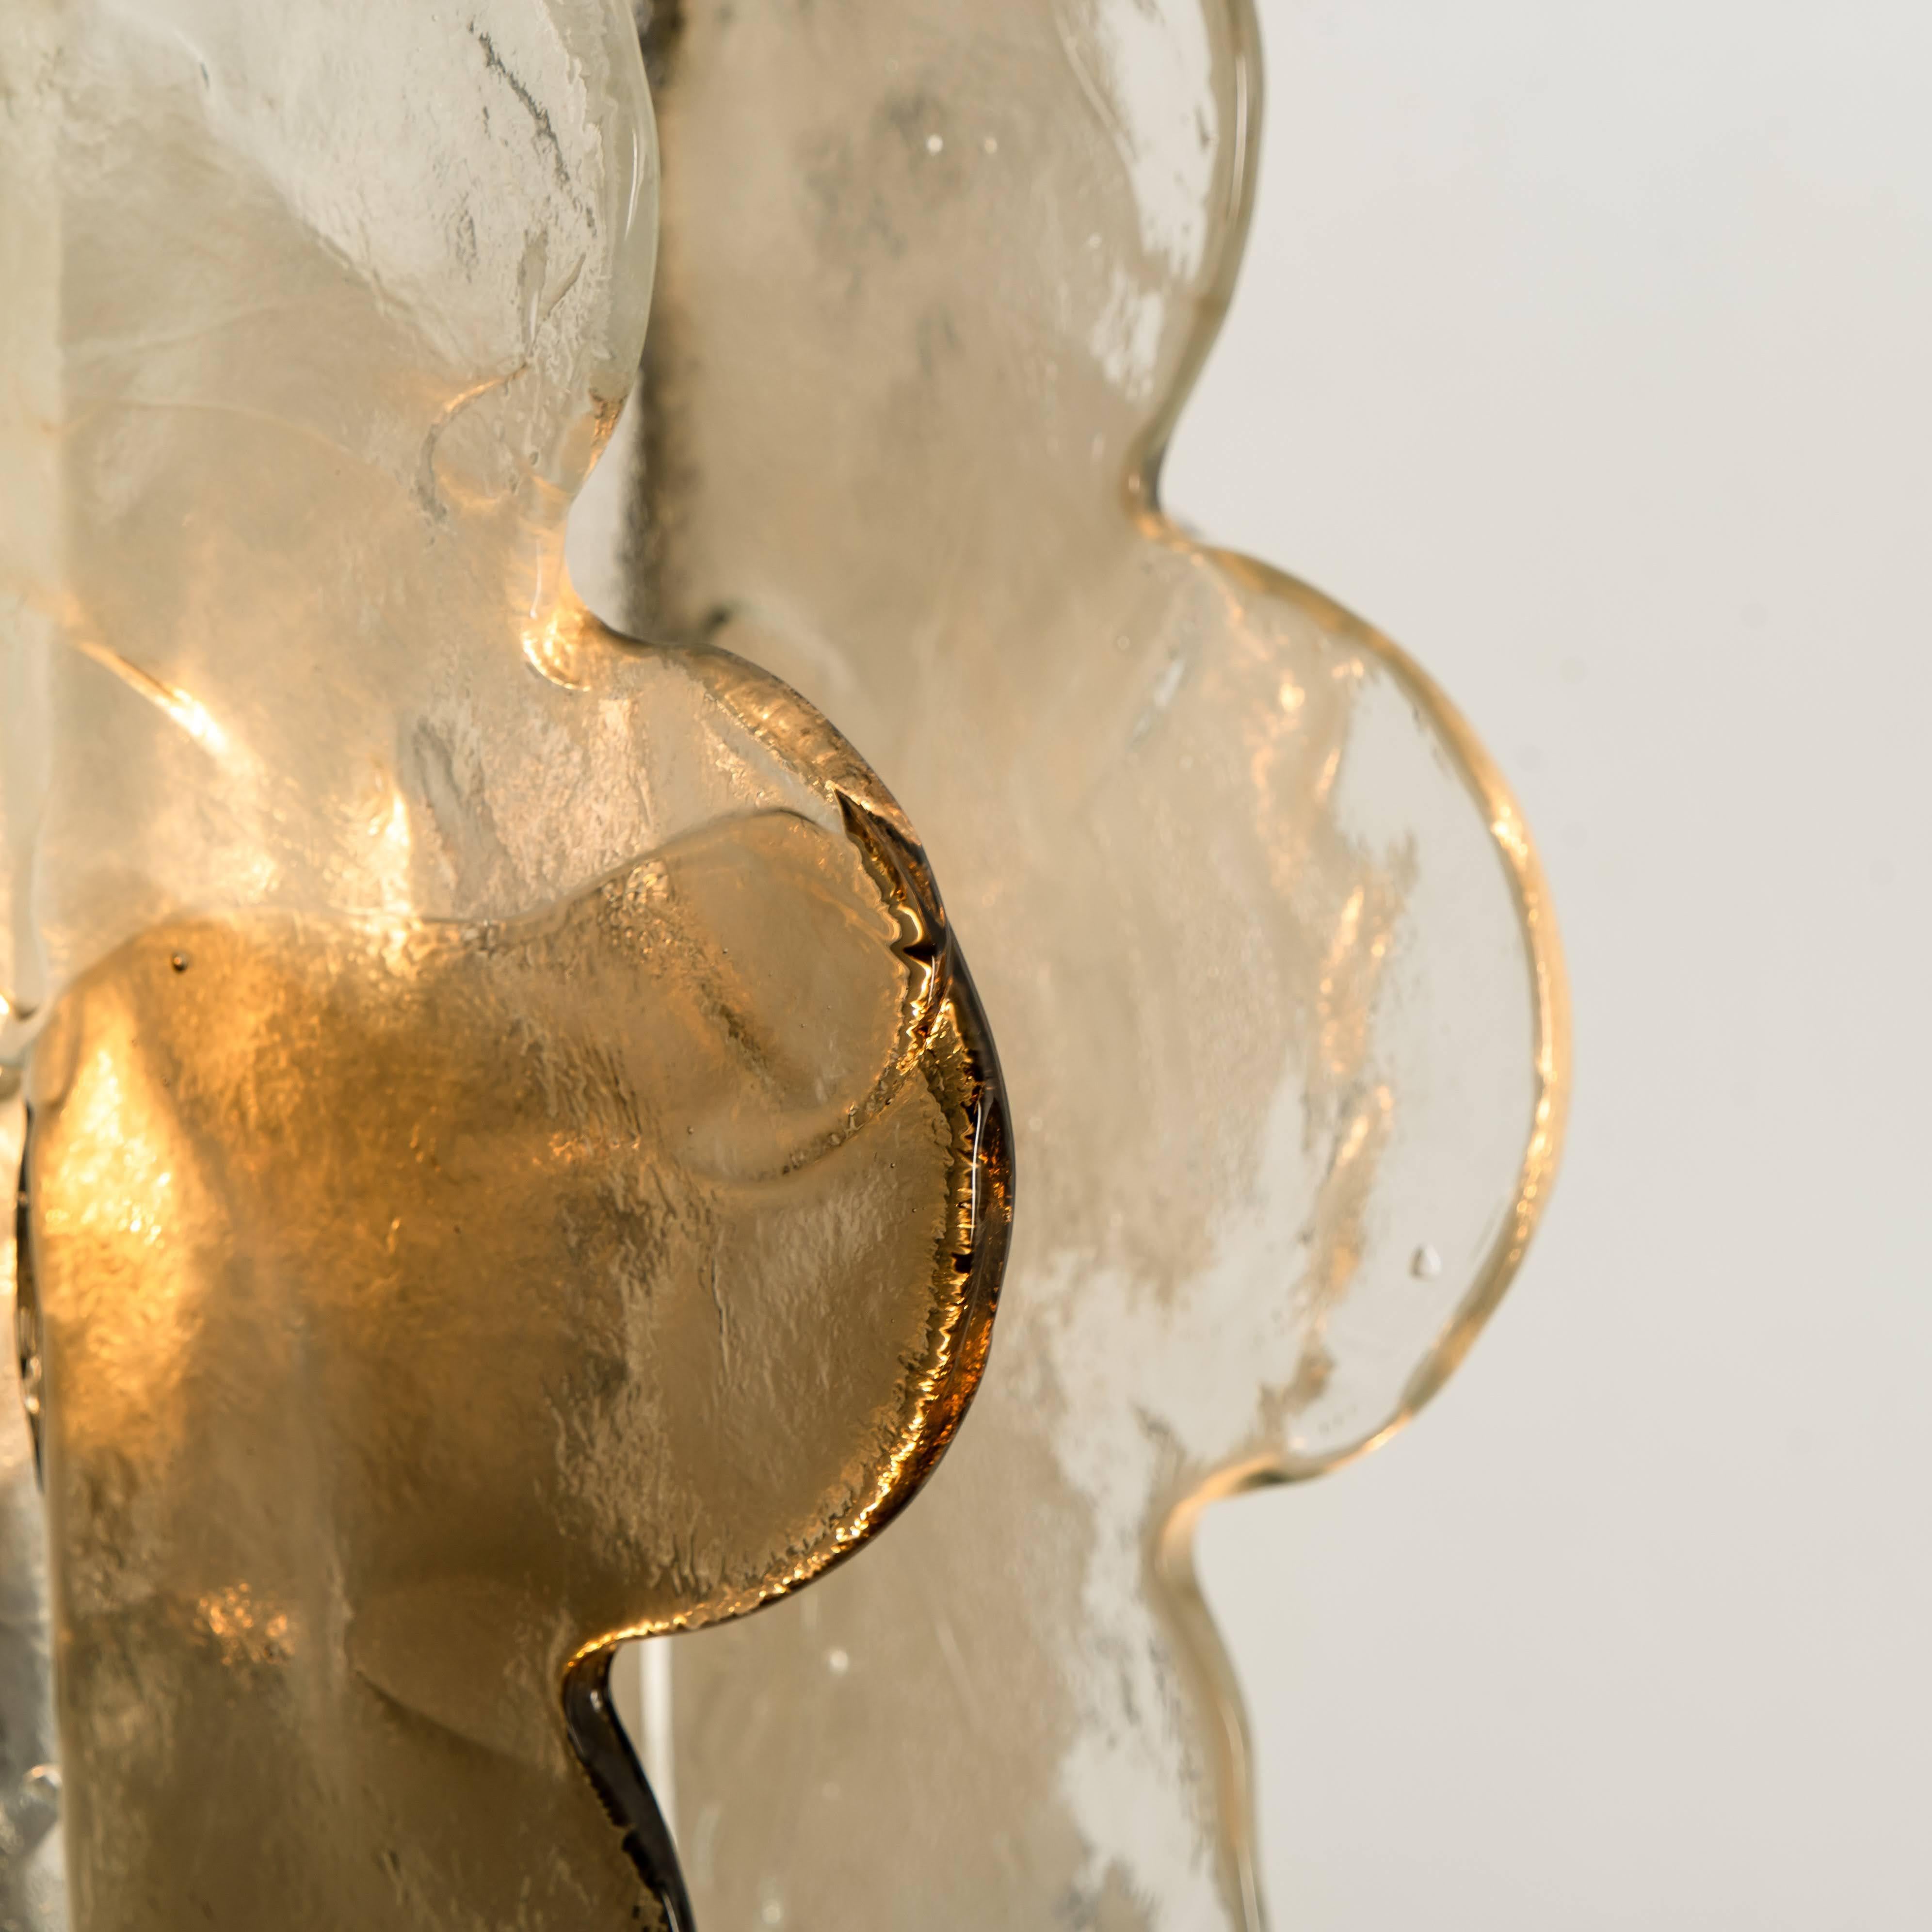 Unique Murano floor lamp, designed by Carlo Nason for Mazzega. Manufactured in circa 1970 (late 1960s and early 1970s),
circa 1970. Made with four interlocking glass panels in clear and smoked glass, which are mounted on a nickel-plated base.